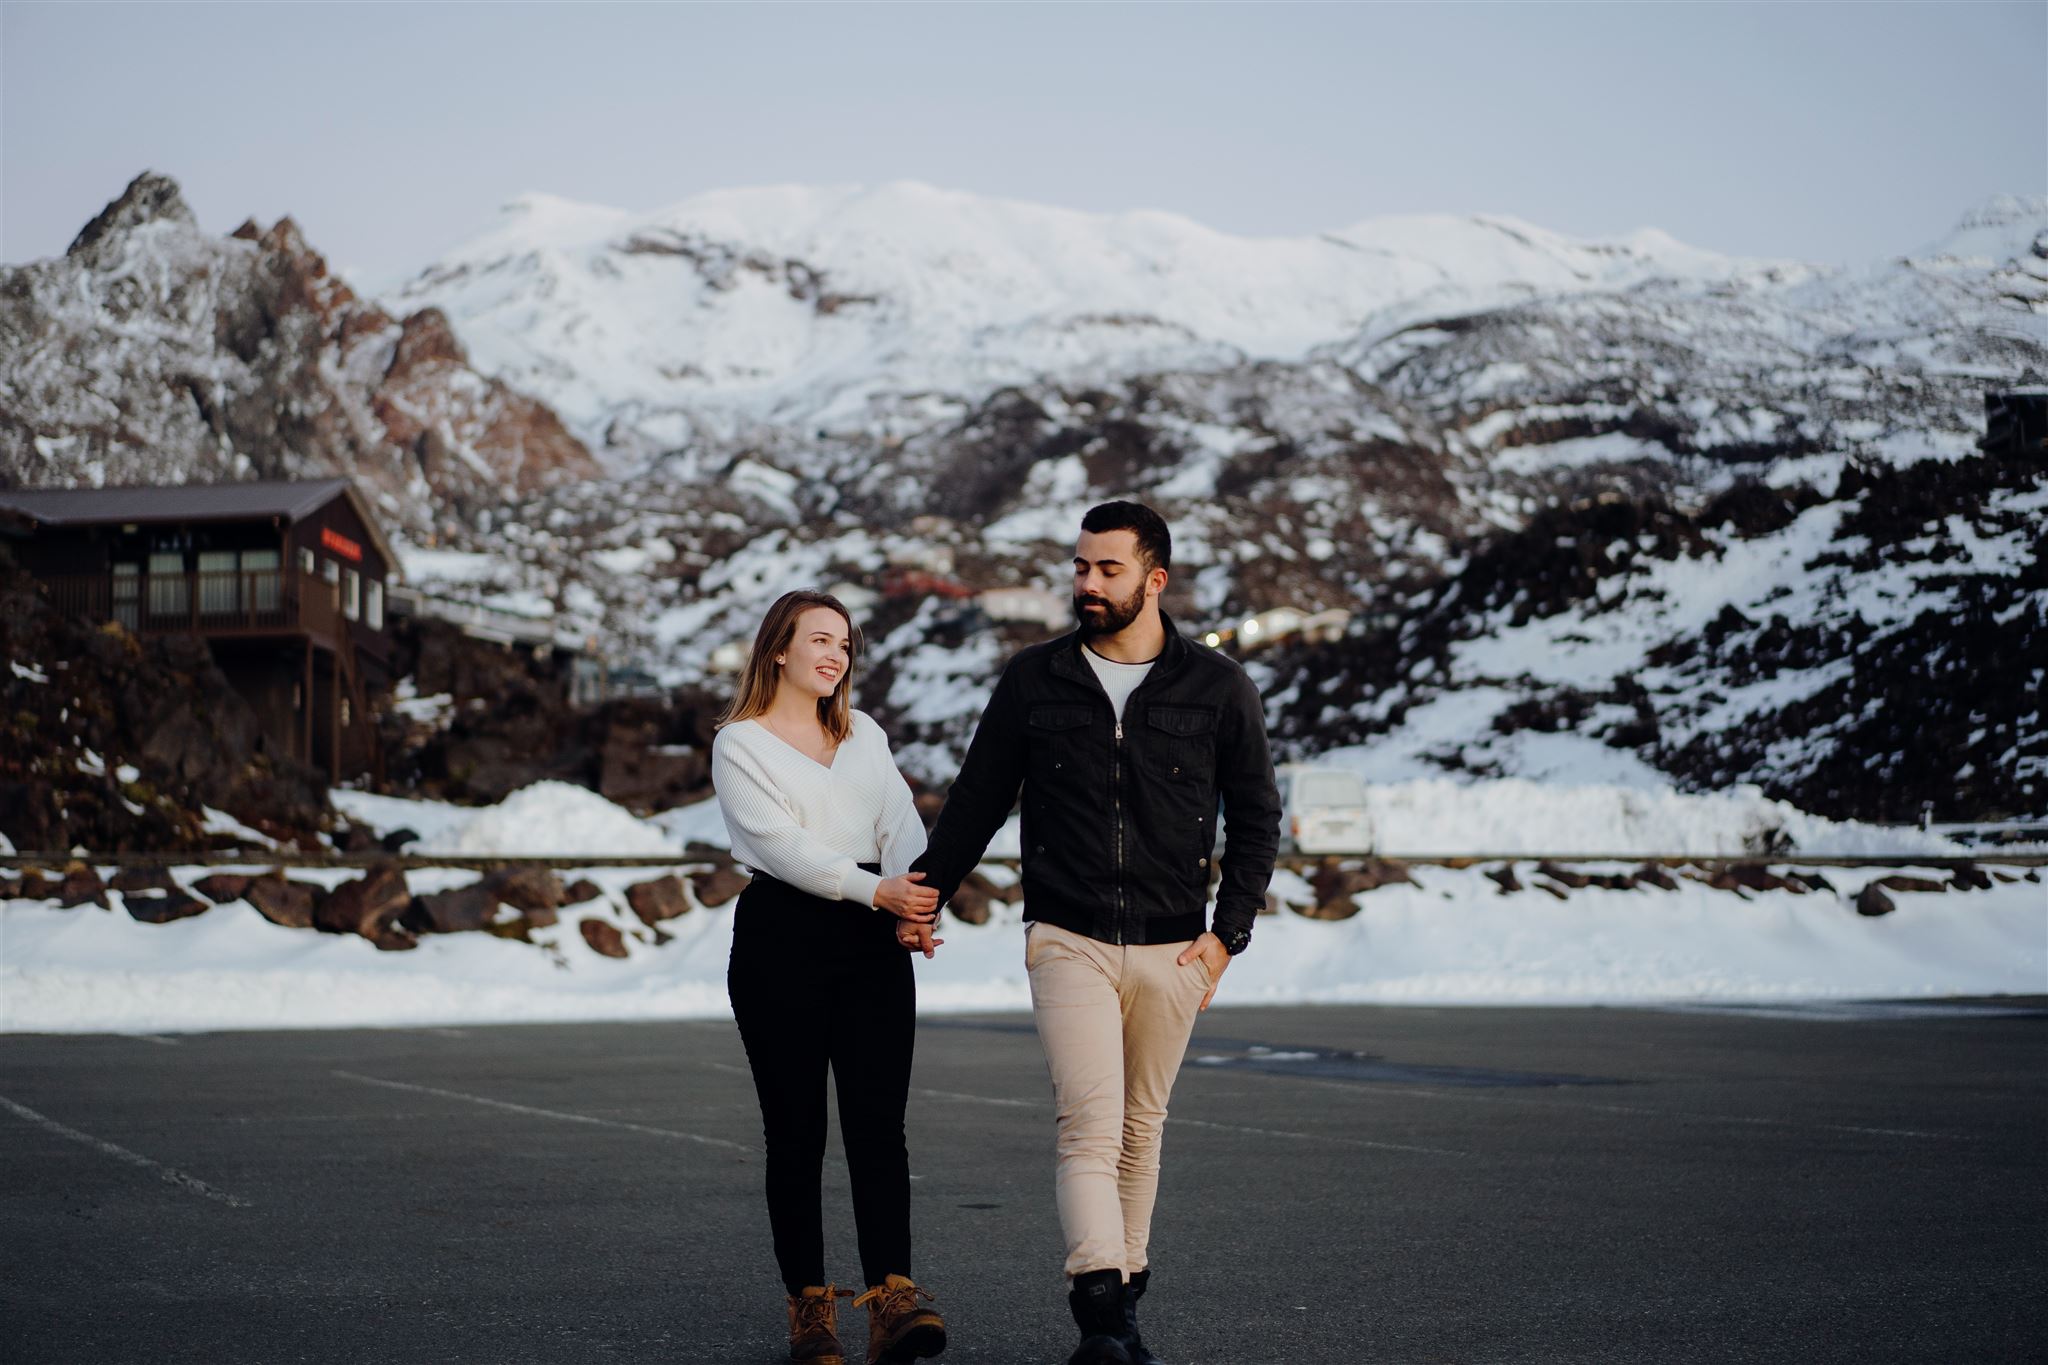 A couple walking in the car park at Mount Ruapehu Ski Fields photographed while on Holiday by wedding photographer Haley Adele Photography